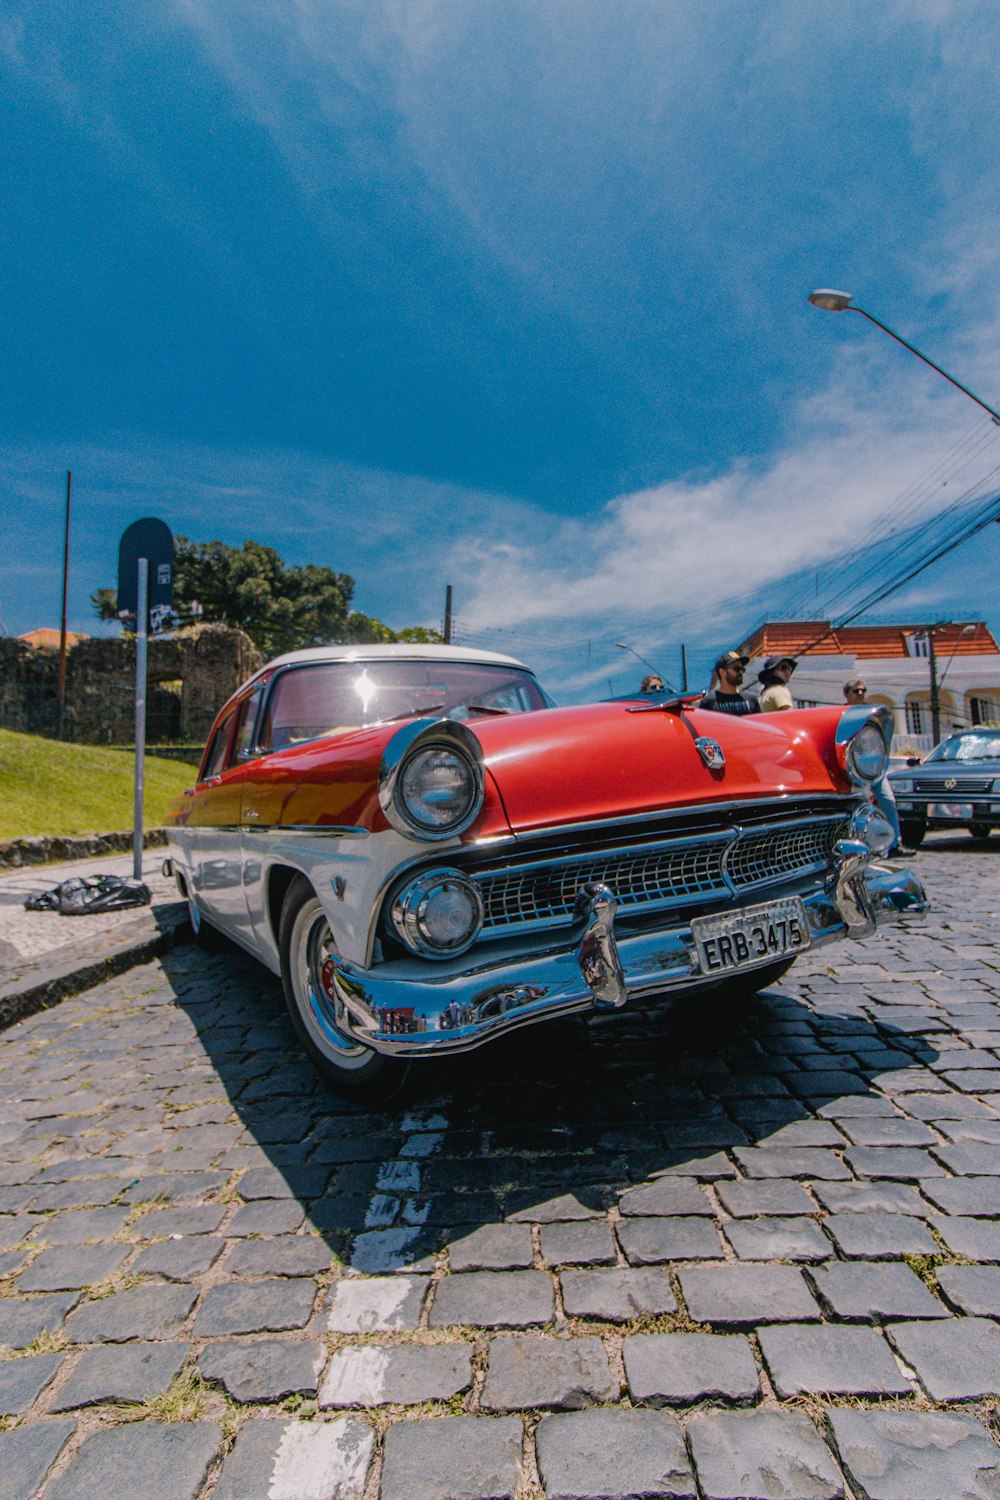 red and white vintage car on gray concrete pavement